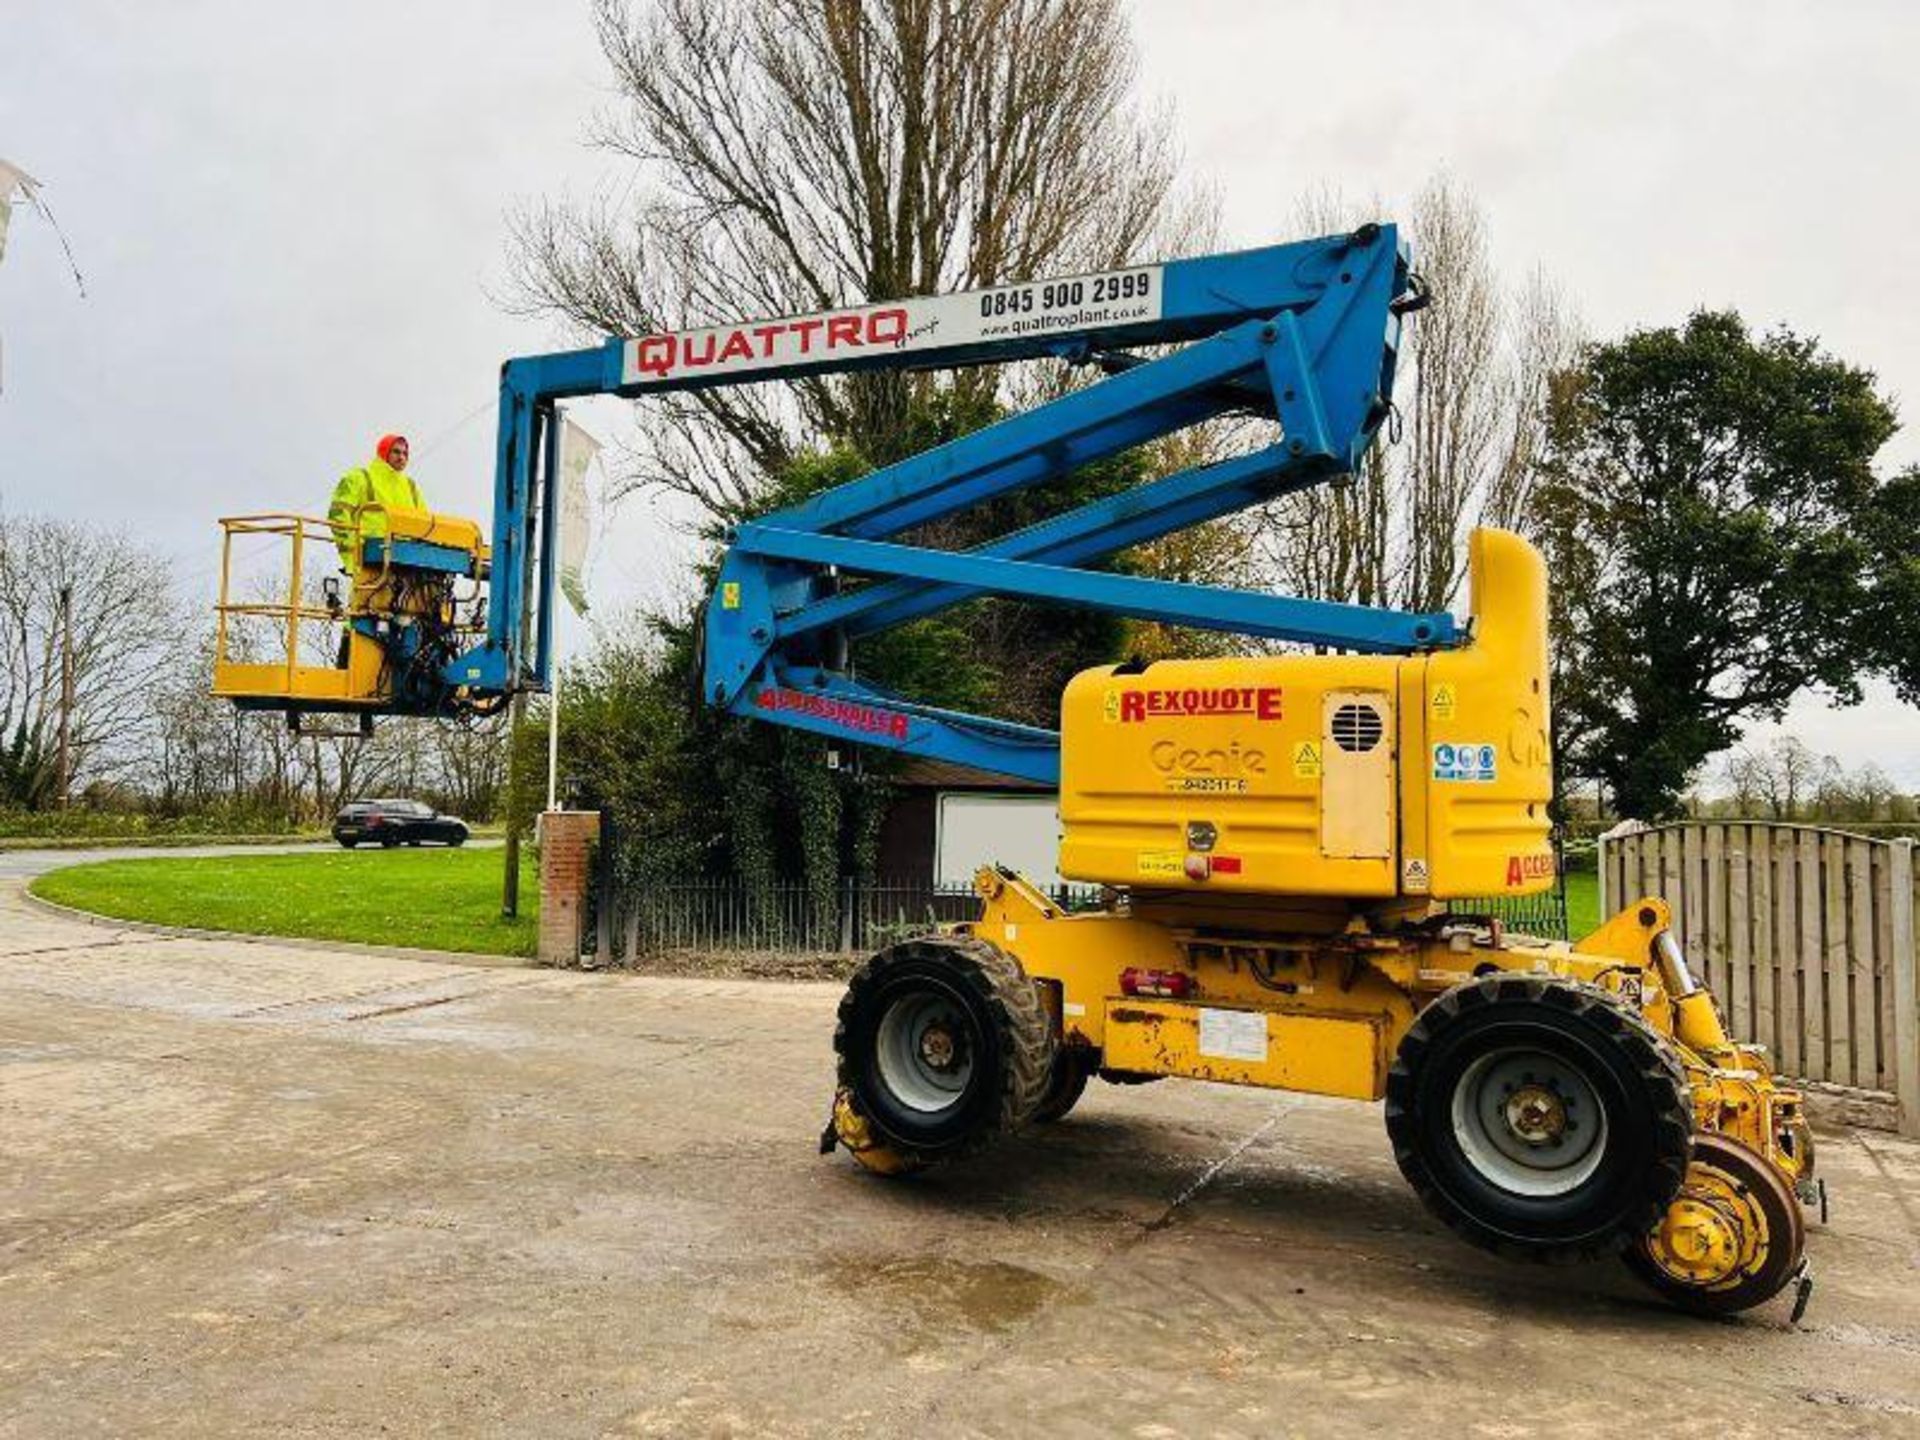 GENIE Z-60/34 4WD ARTICULATED RAIL ROAD BOOM LIFT *20.3 METERS* REMOTE CONTROL DRIVE - Image 11 of 11